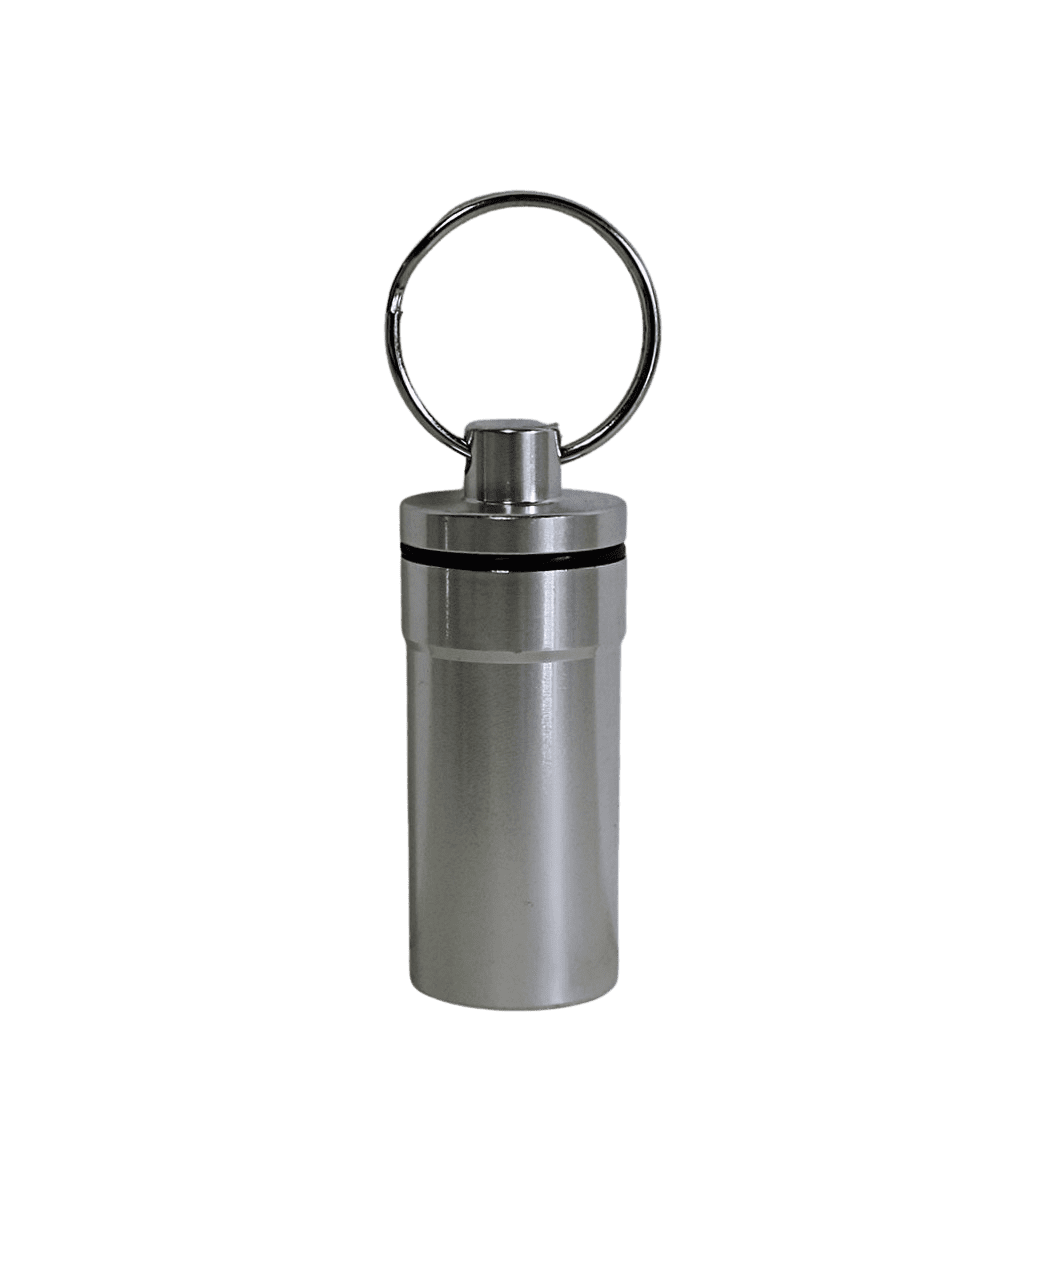 4 SQUARE METAL FLASK KEY CHAINS stash drinking can PARTY ALCOHOL CARRIER NEW